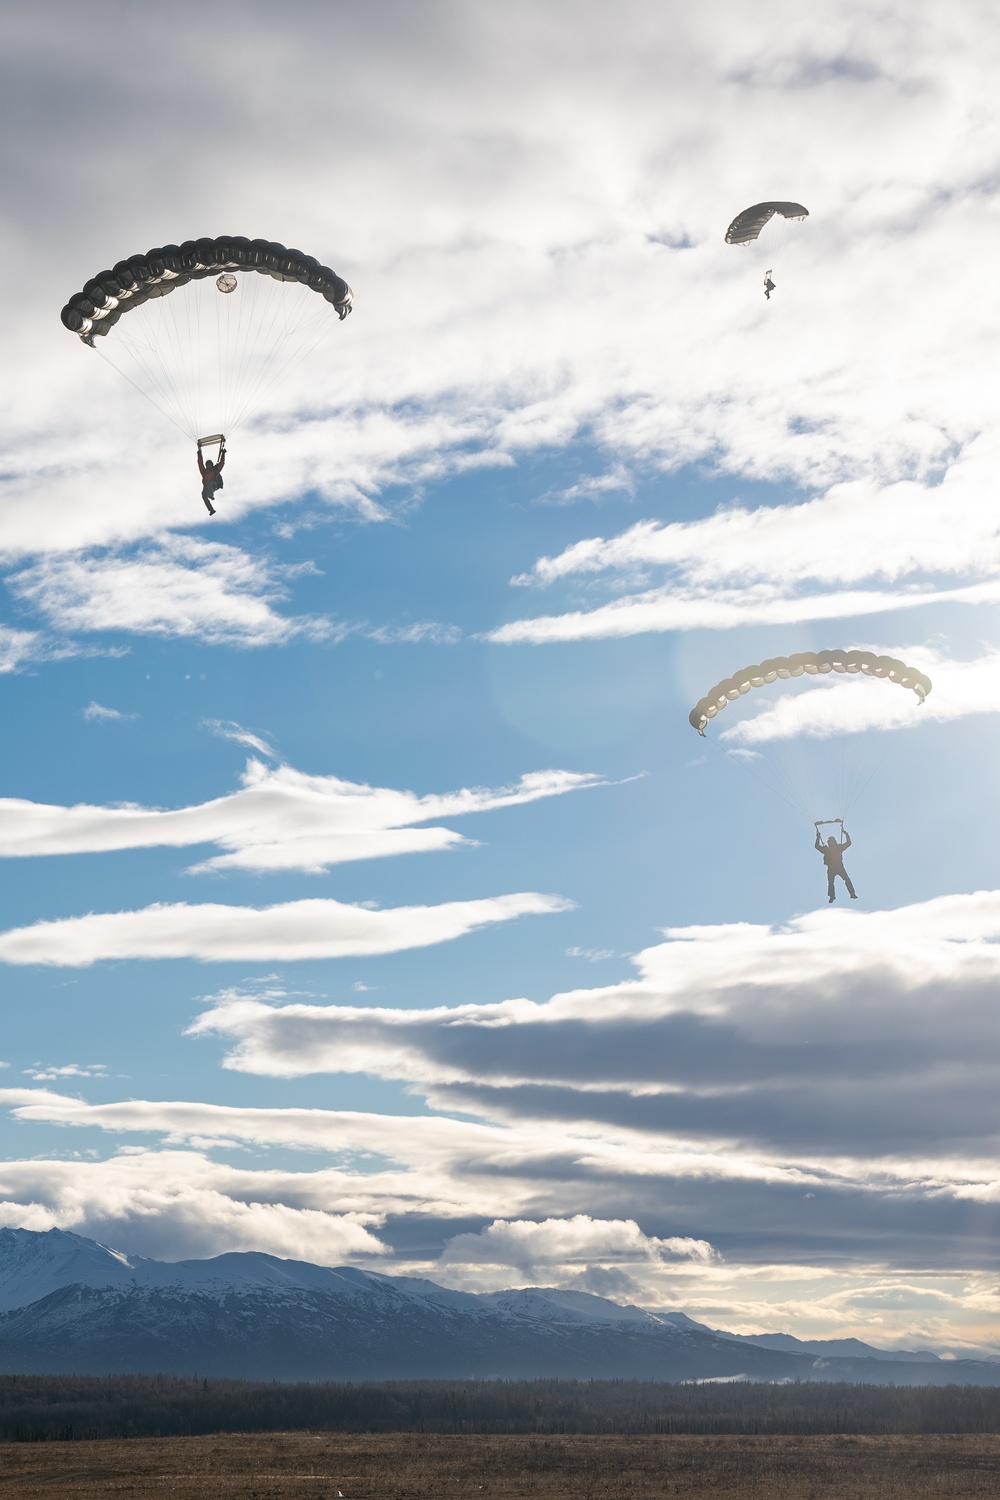 212th Rescue Squadron partners with Army National Guard for training jumps